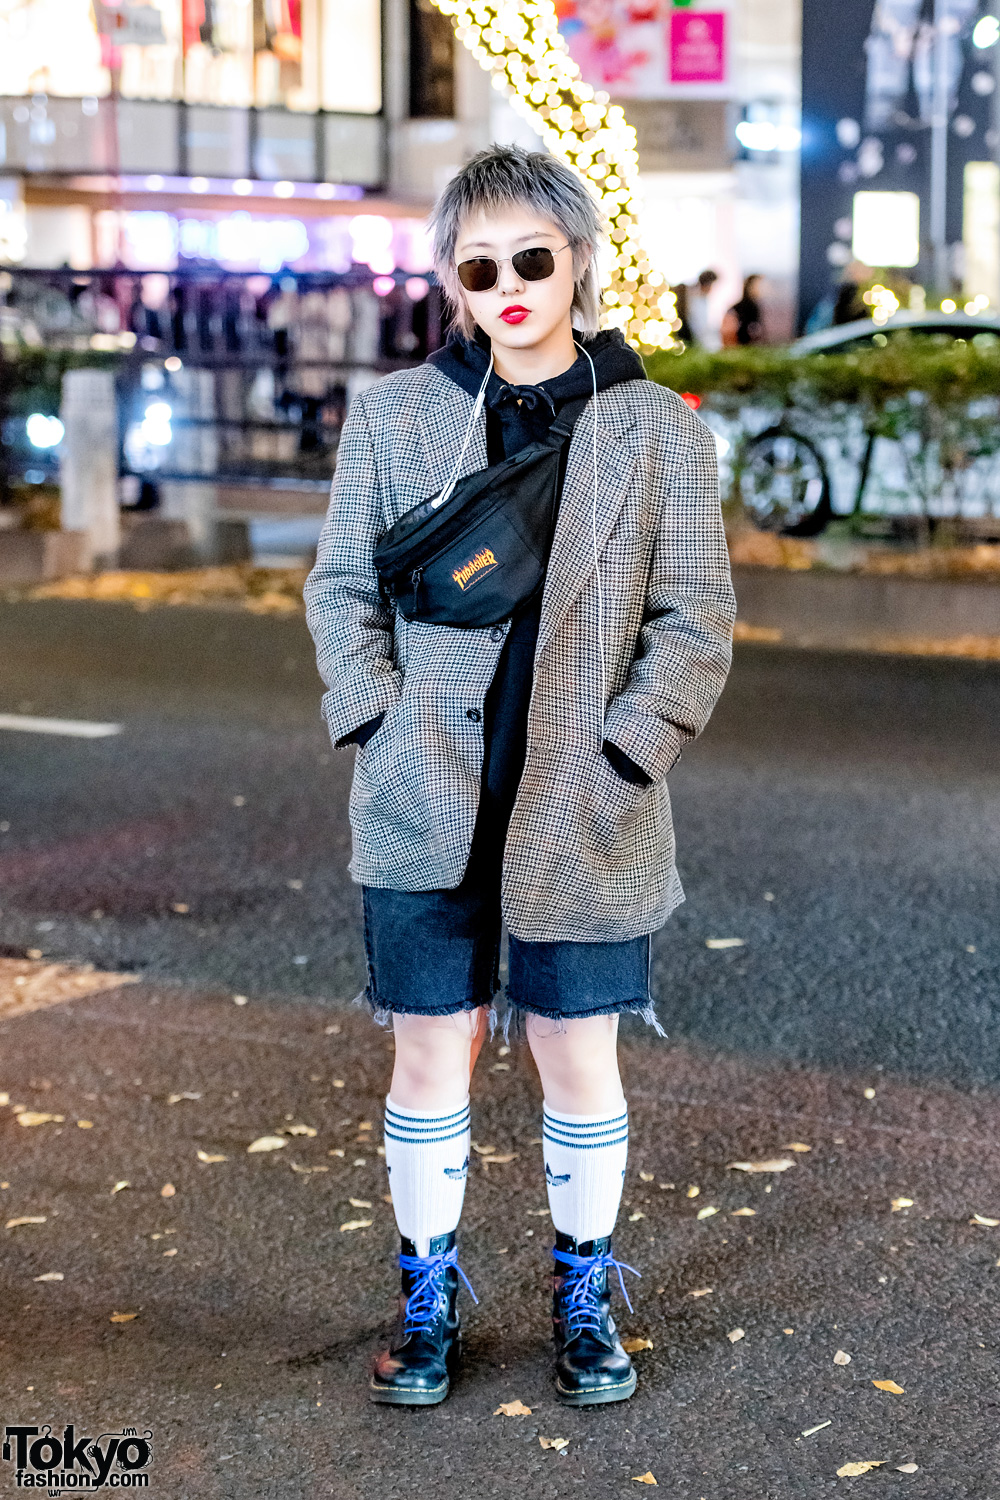 Harajuku Models in Casual Street Styles w/ Dr. Martens Boots, New